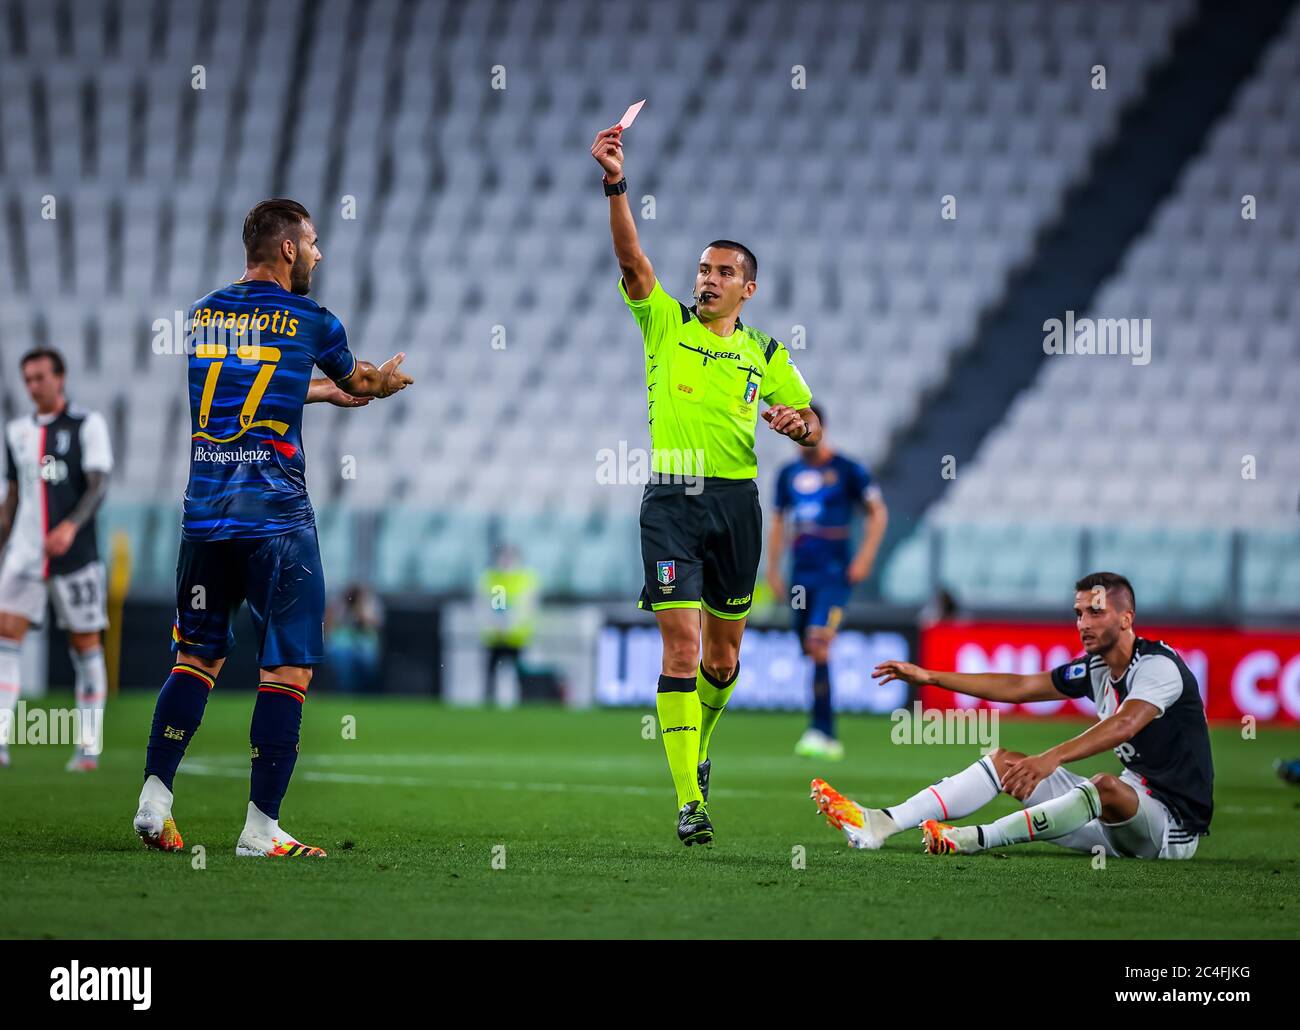 at the Allianz Stadium, Turin, Italy, 26 Jun 2020, panagiotis tachtsidis of us lecce red card during the serie a 2019/20 match between juventus vs us lecce at the allianz stadium ,  turin ,  italy on june 26 ,  2020 - photo fabrizio carabelli during Juventus vs Lecce -  - Credit: LM/Fabrizio Carabelli/Alamy Live News Stock Photo